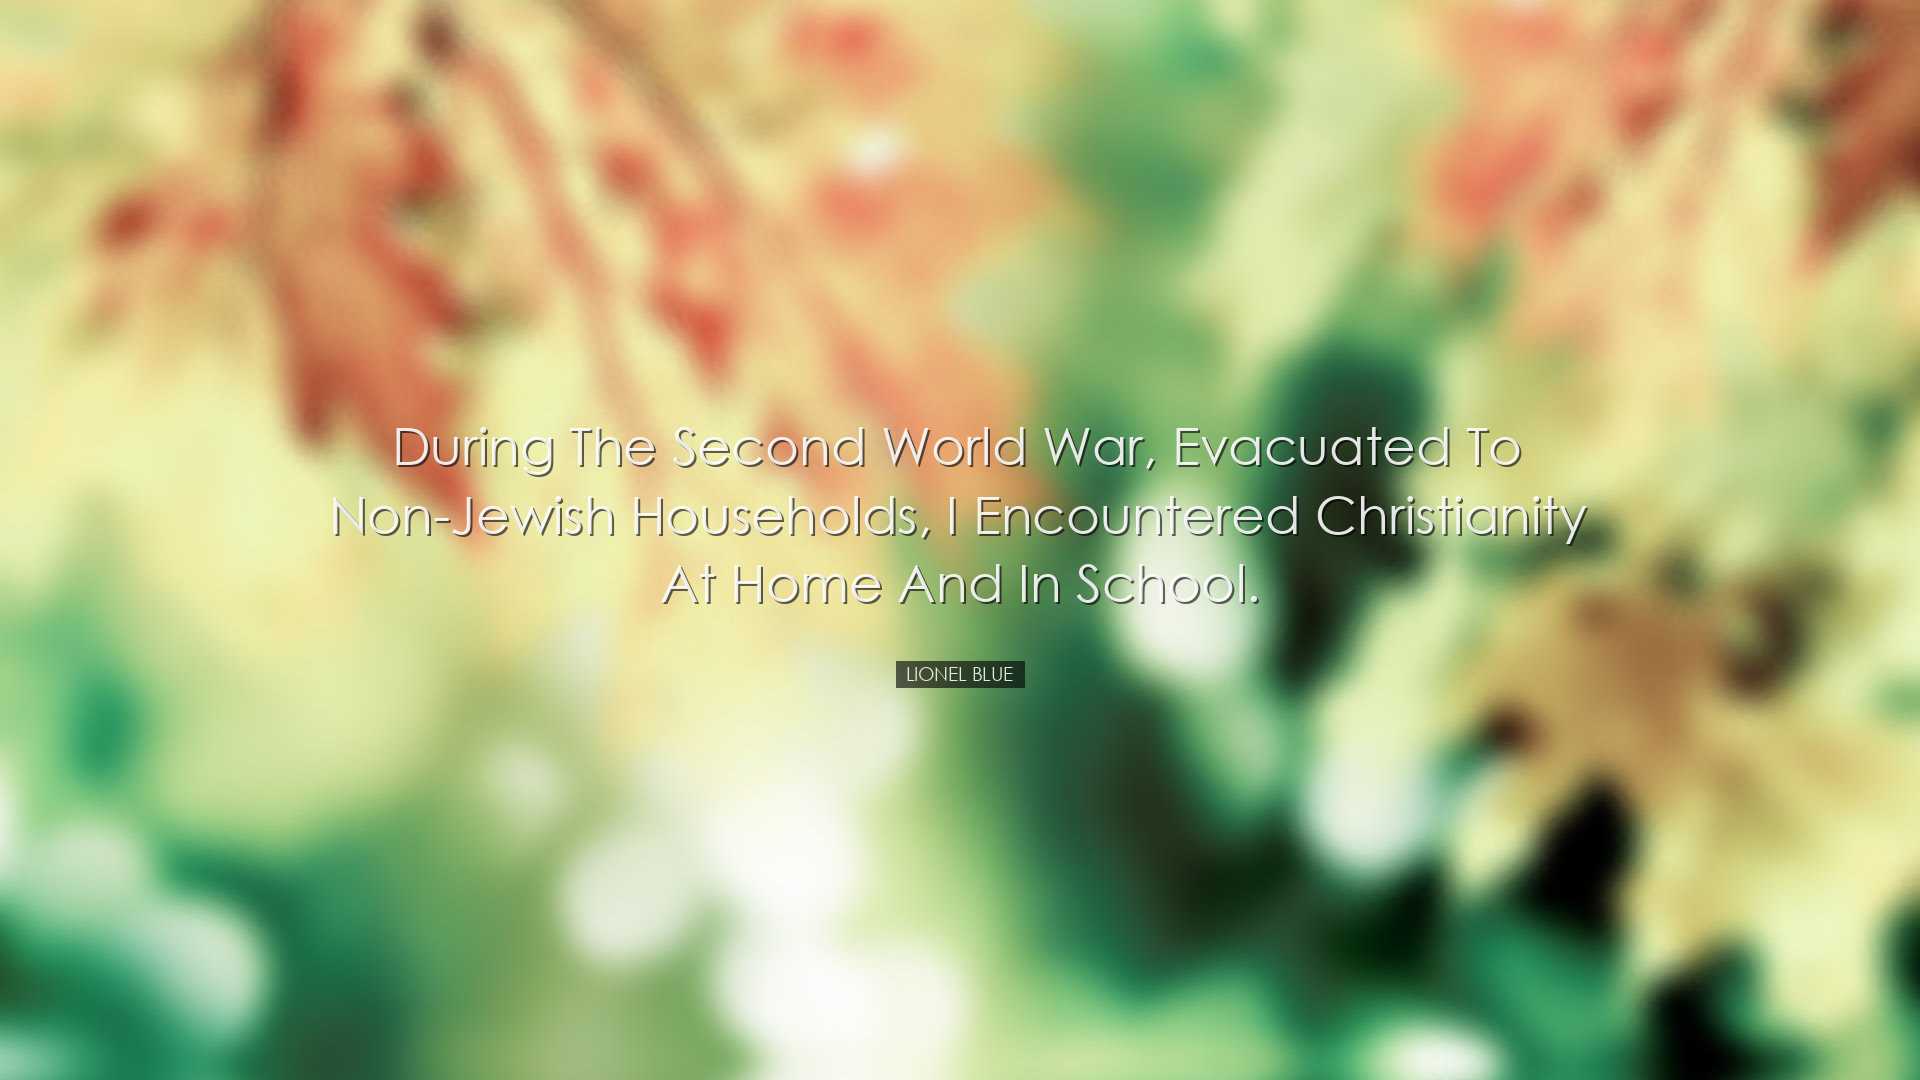 During the Second World War, evacuated to non-Jewish households, I